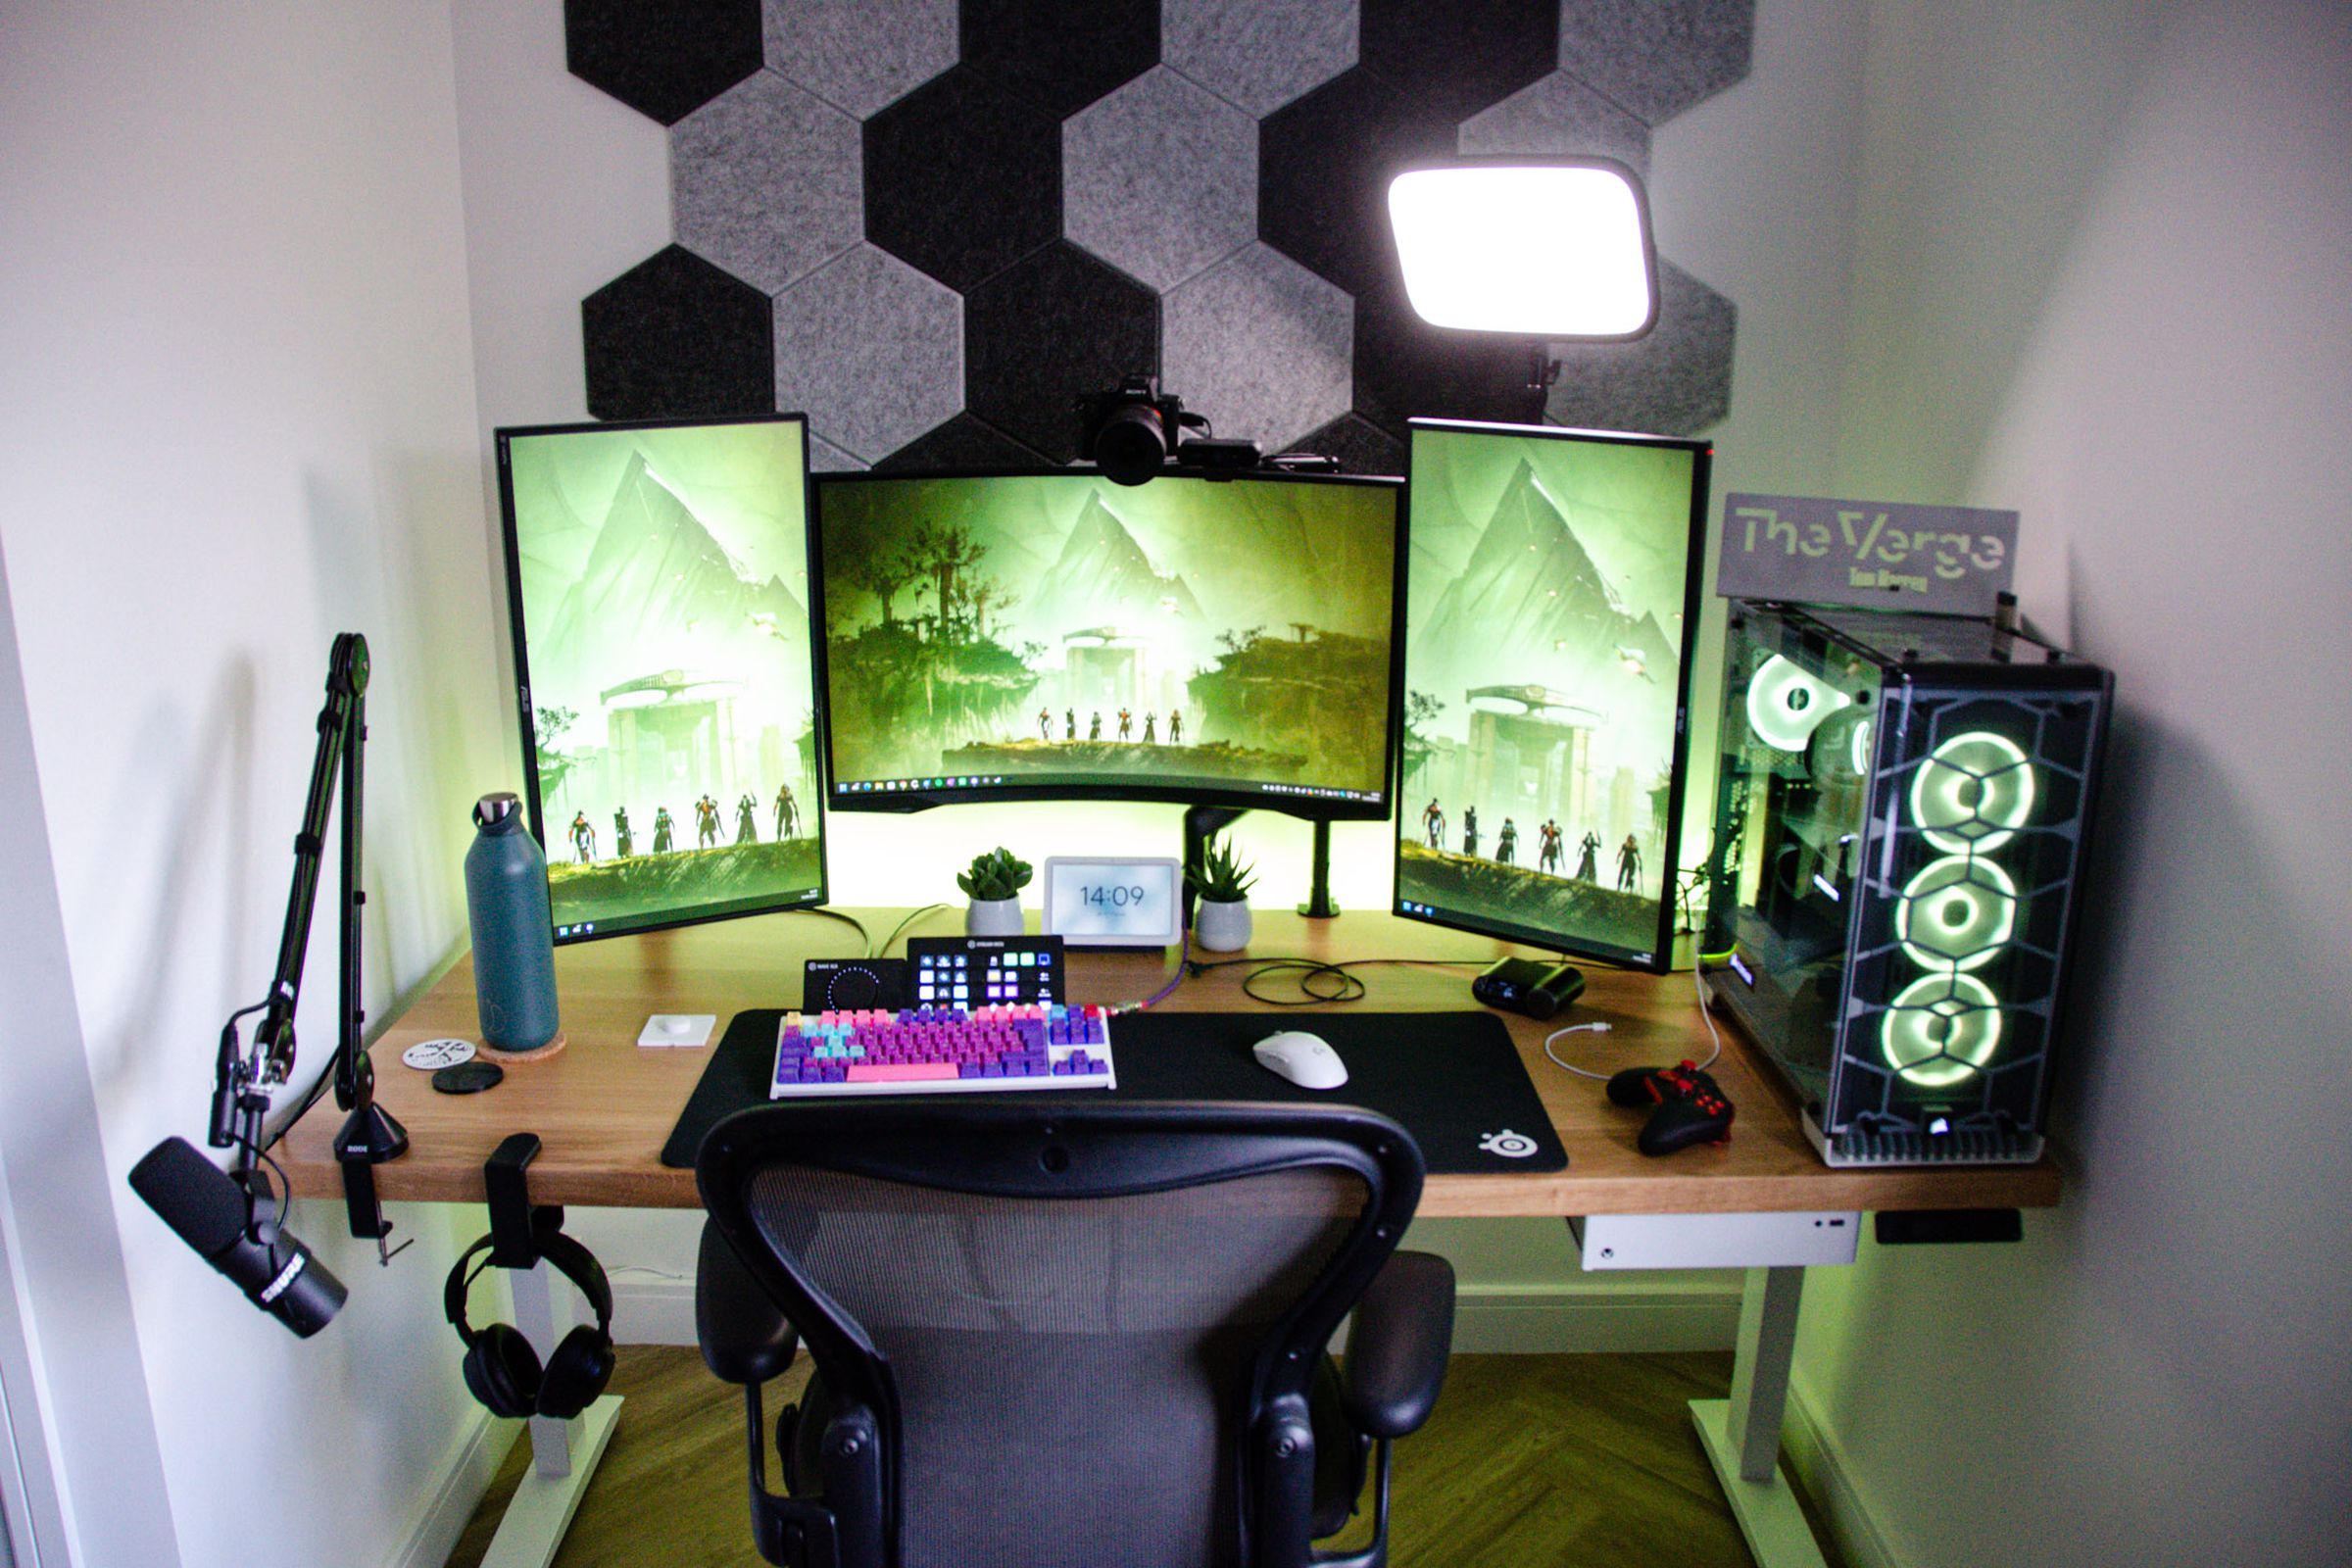 A desk in an alcove with three monitors, a geometrical design on the wall behind it, a colorful gaming keyboard, and a variety of other tech.